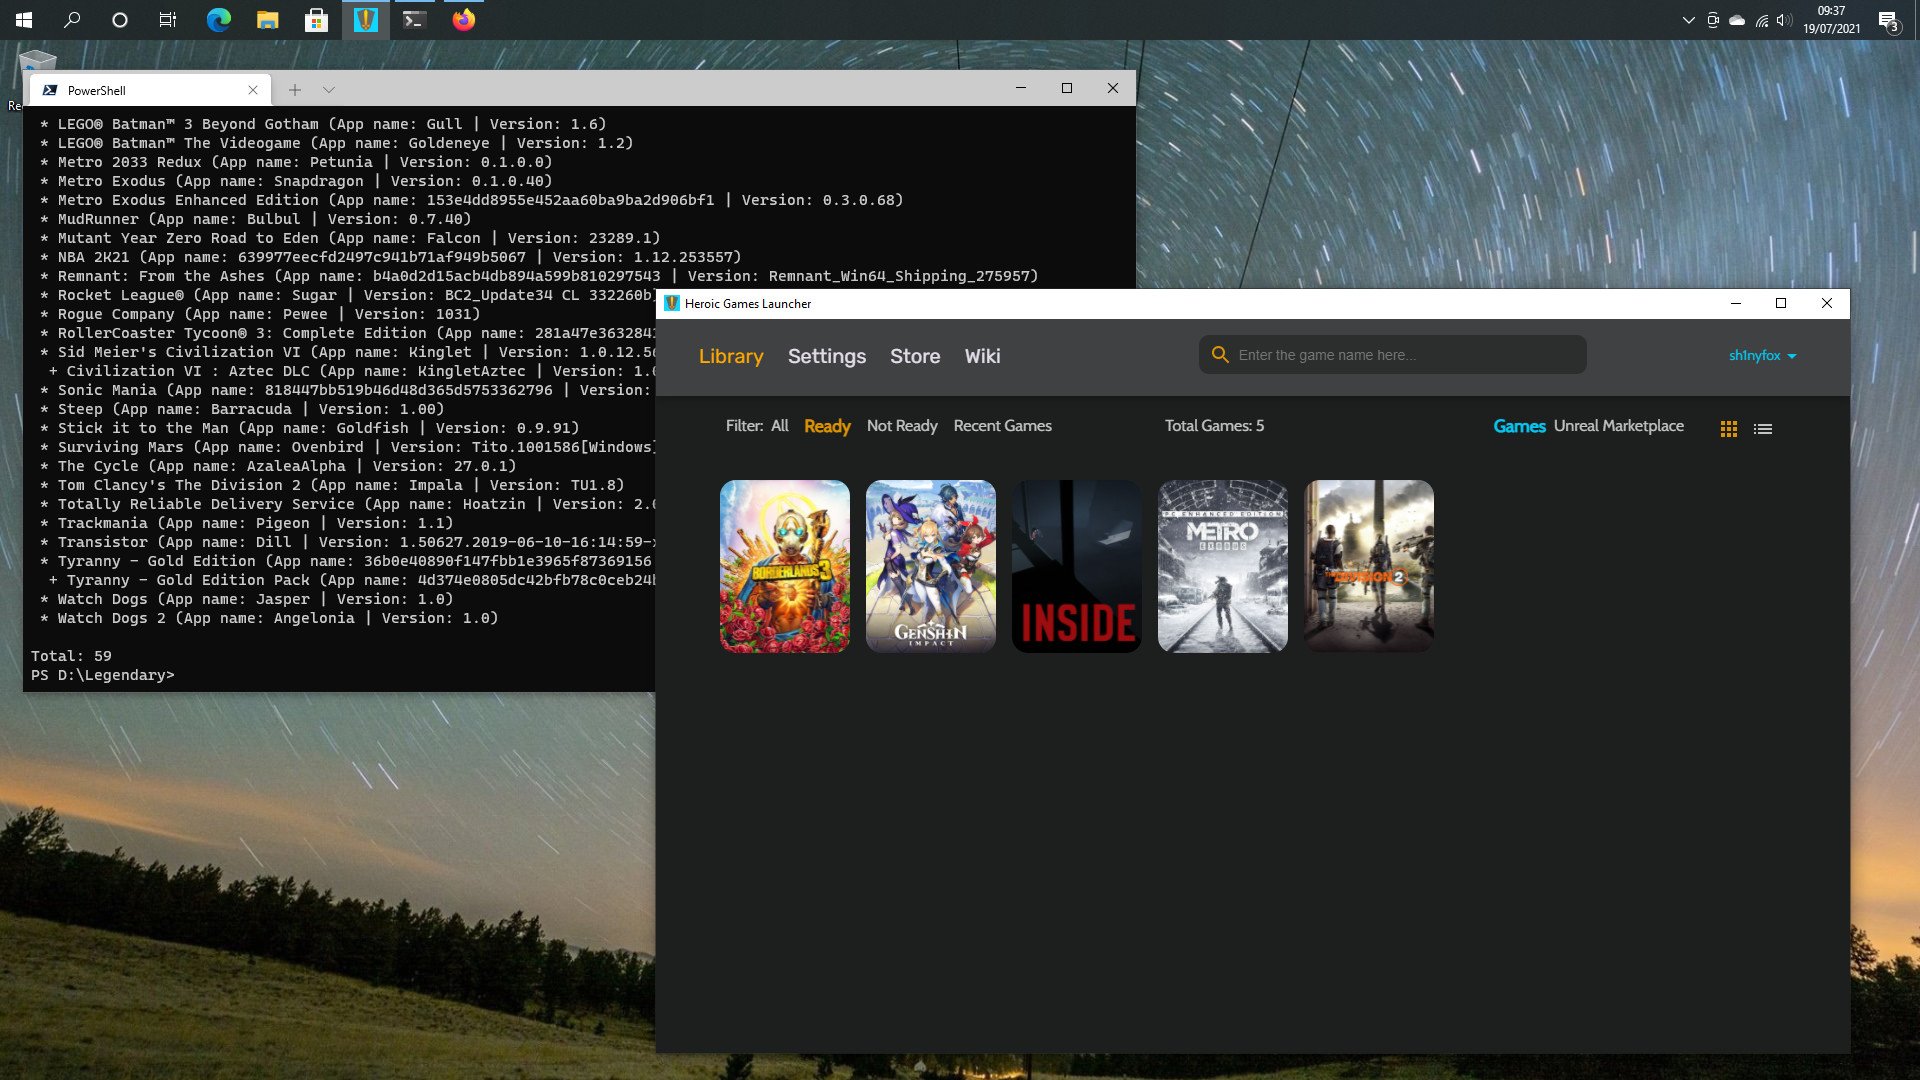 The Epic Store on Linux continues getting easier to manage with Heroic Games  Launcher